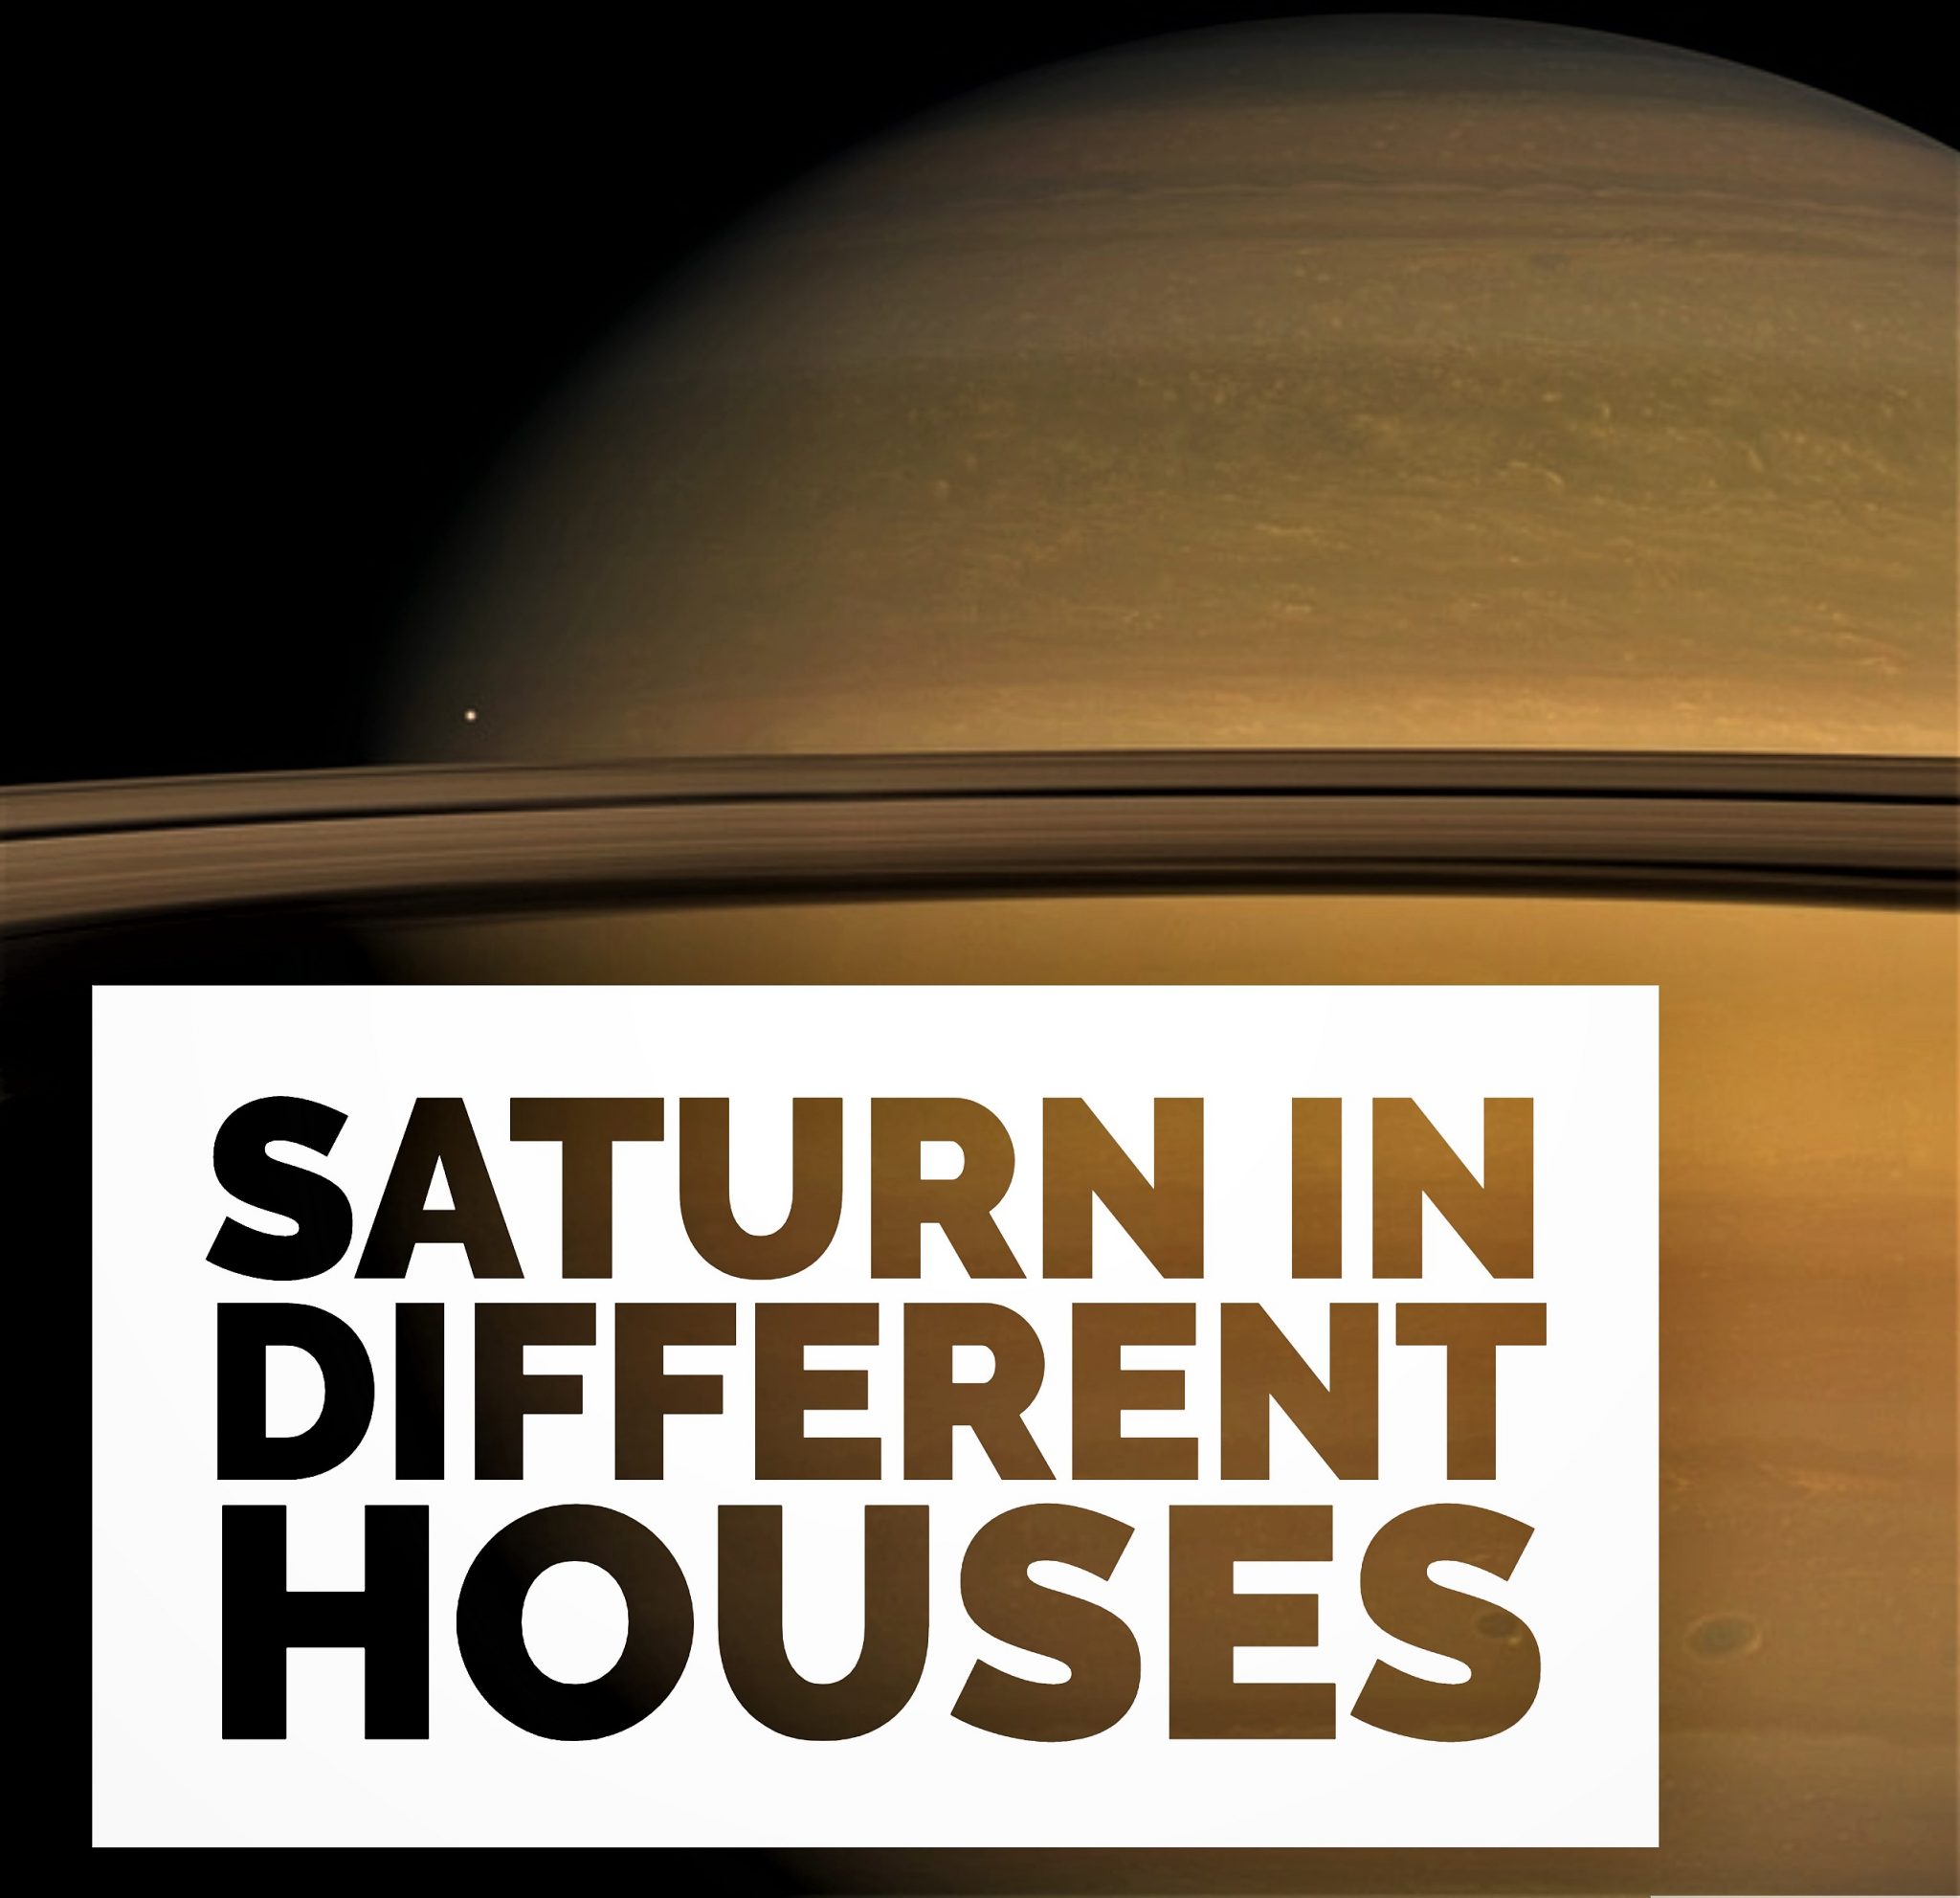 Saturn in Different Houses